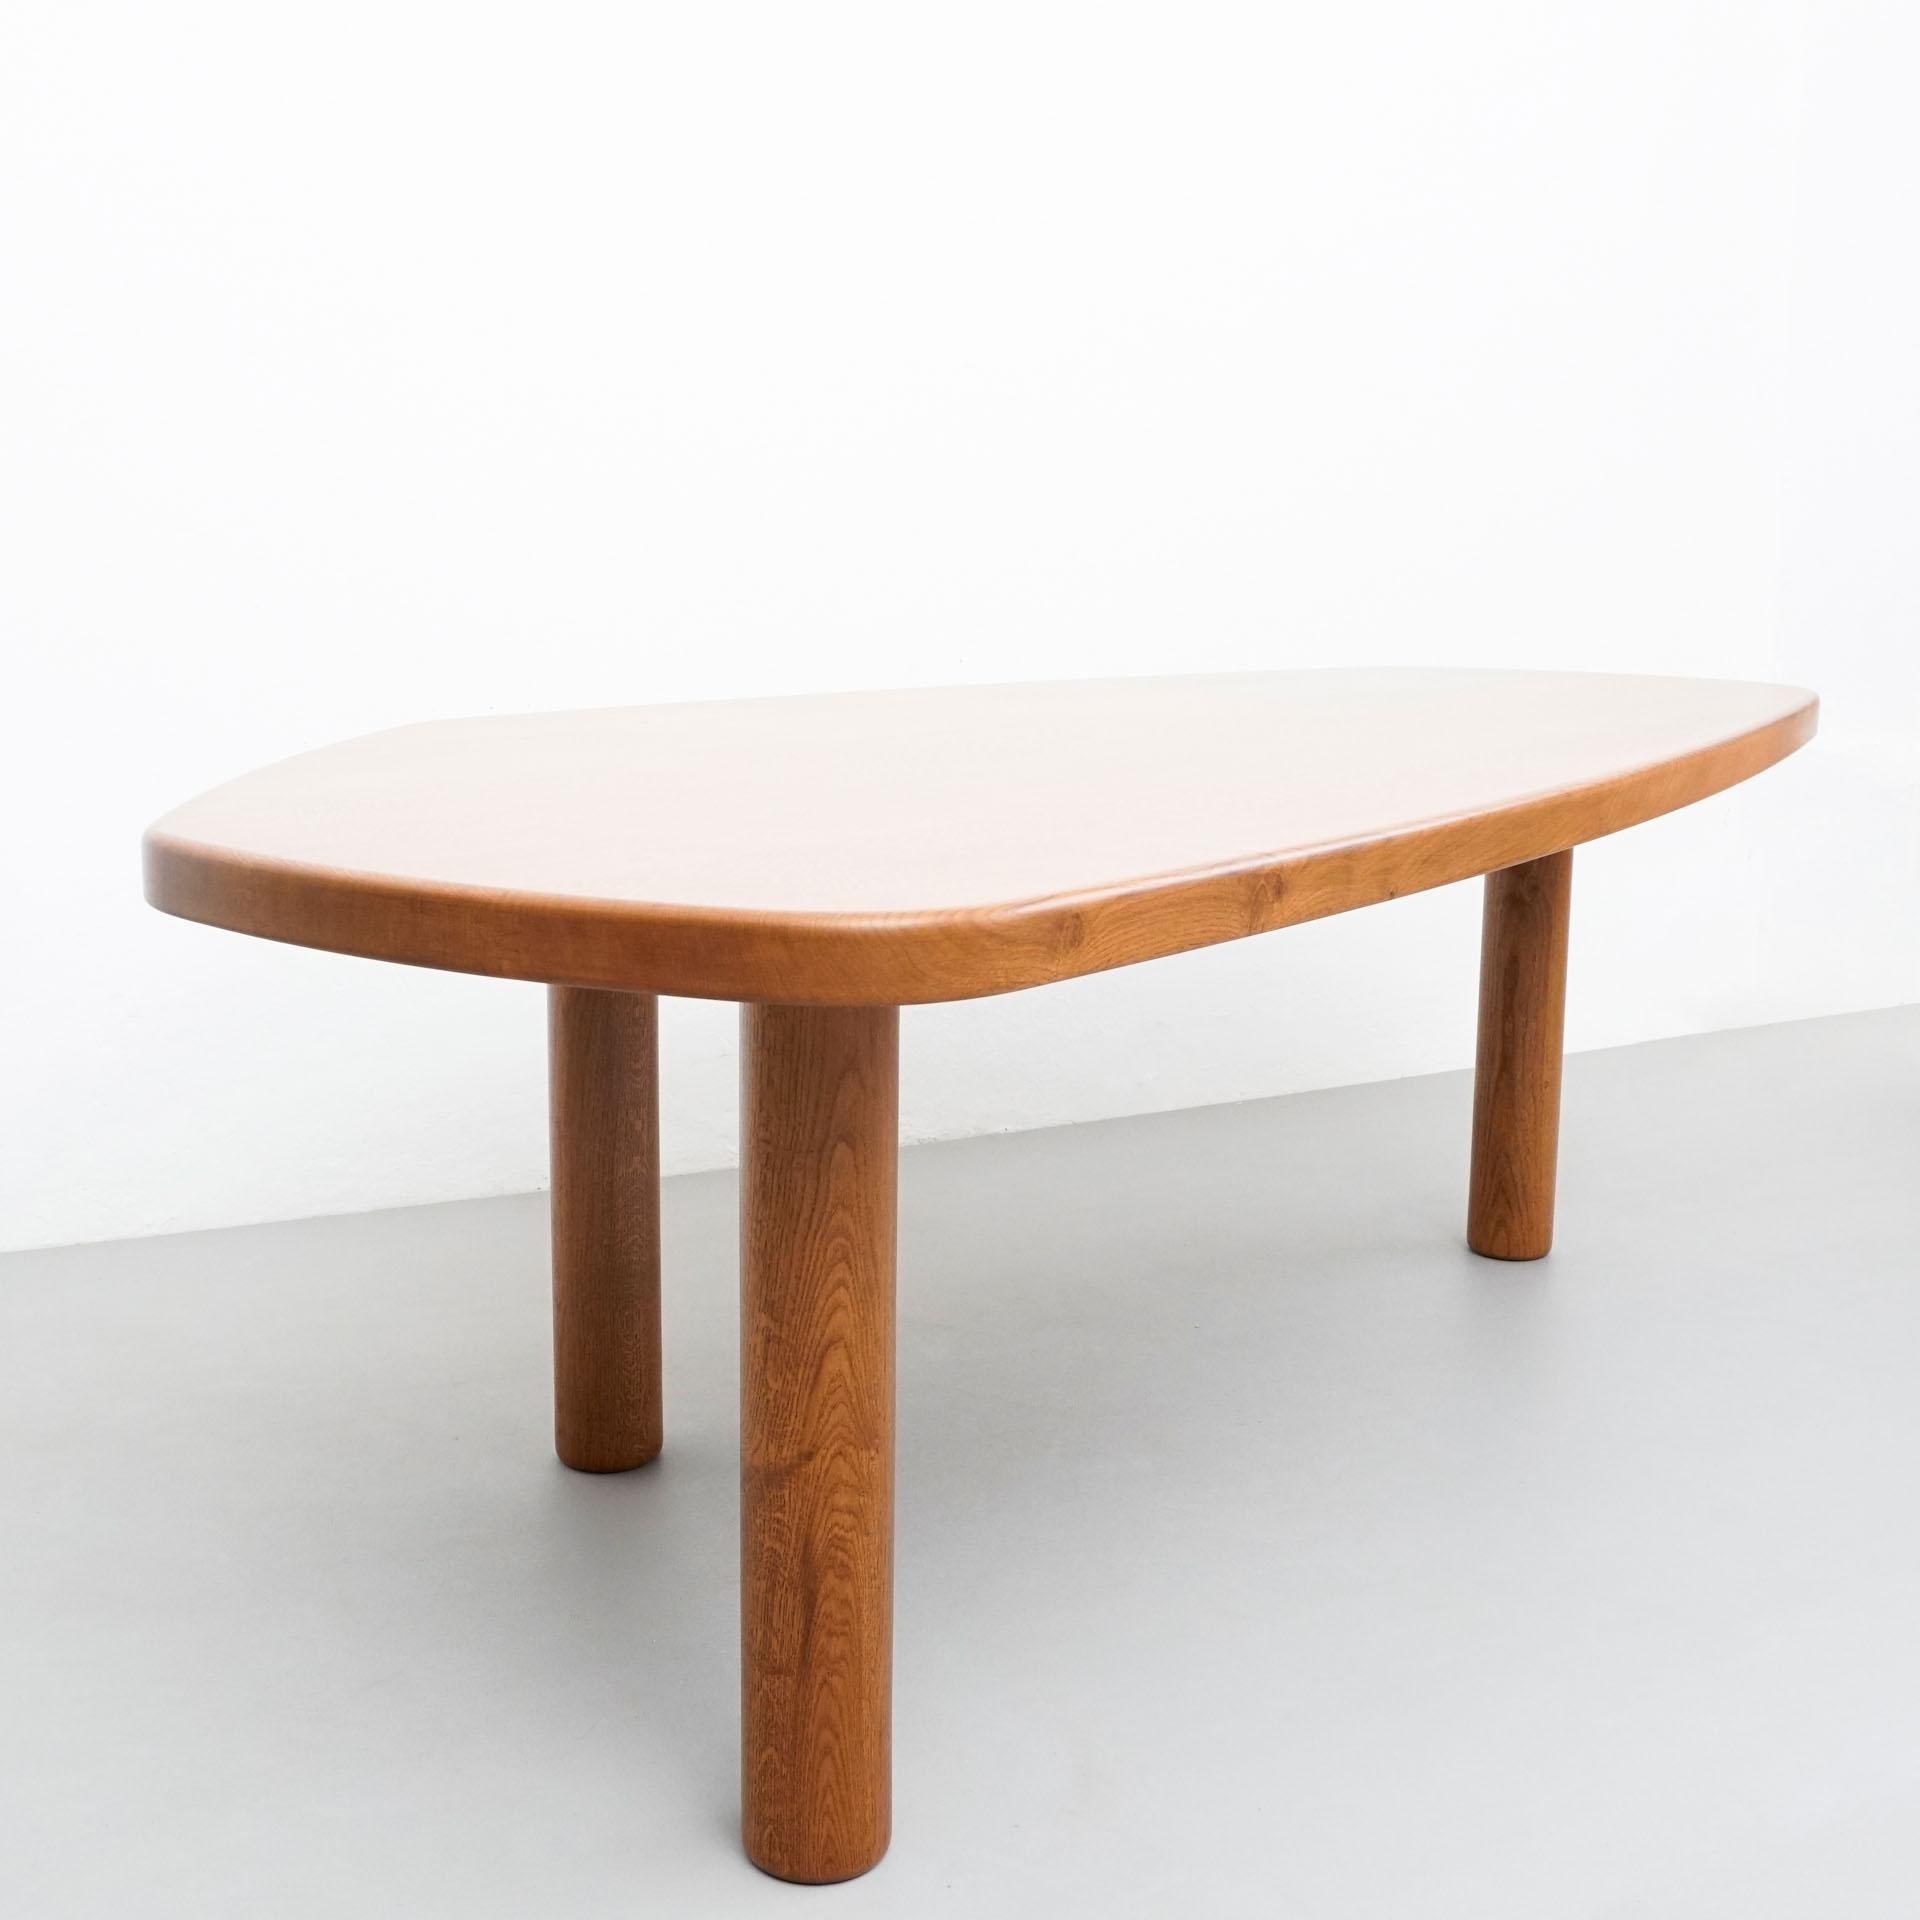 Dada Est. Contemporary, Oak Freeform Dining Large Table In Good Condition For Sale In Barcelona, Barcelona